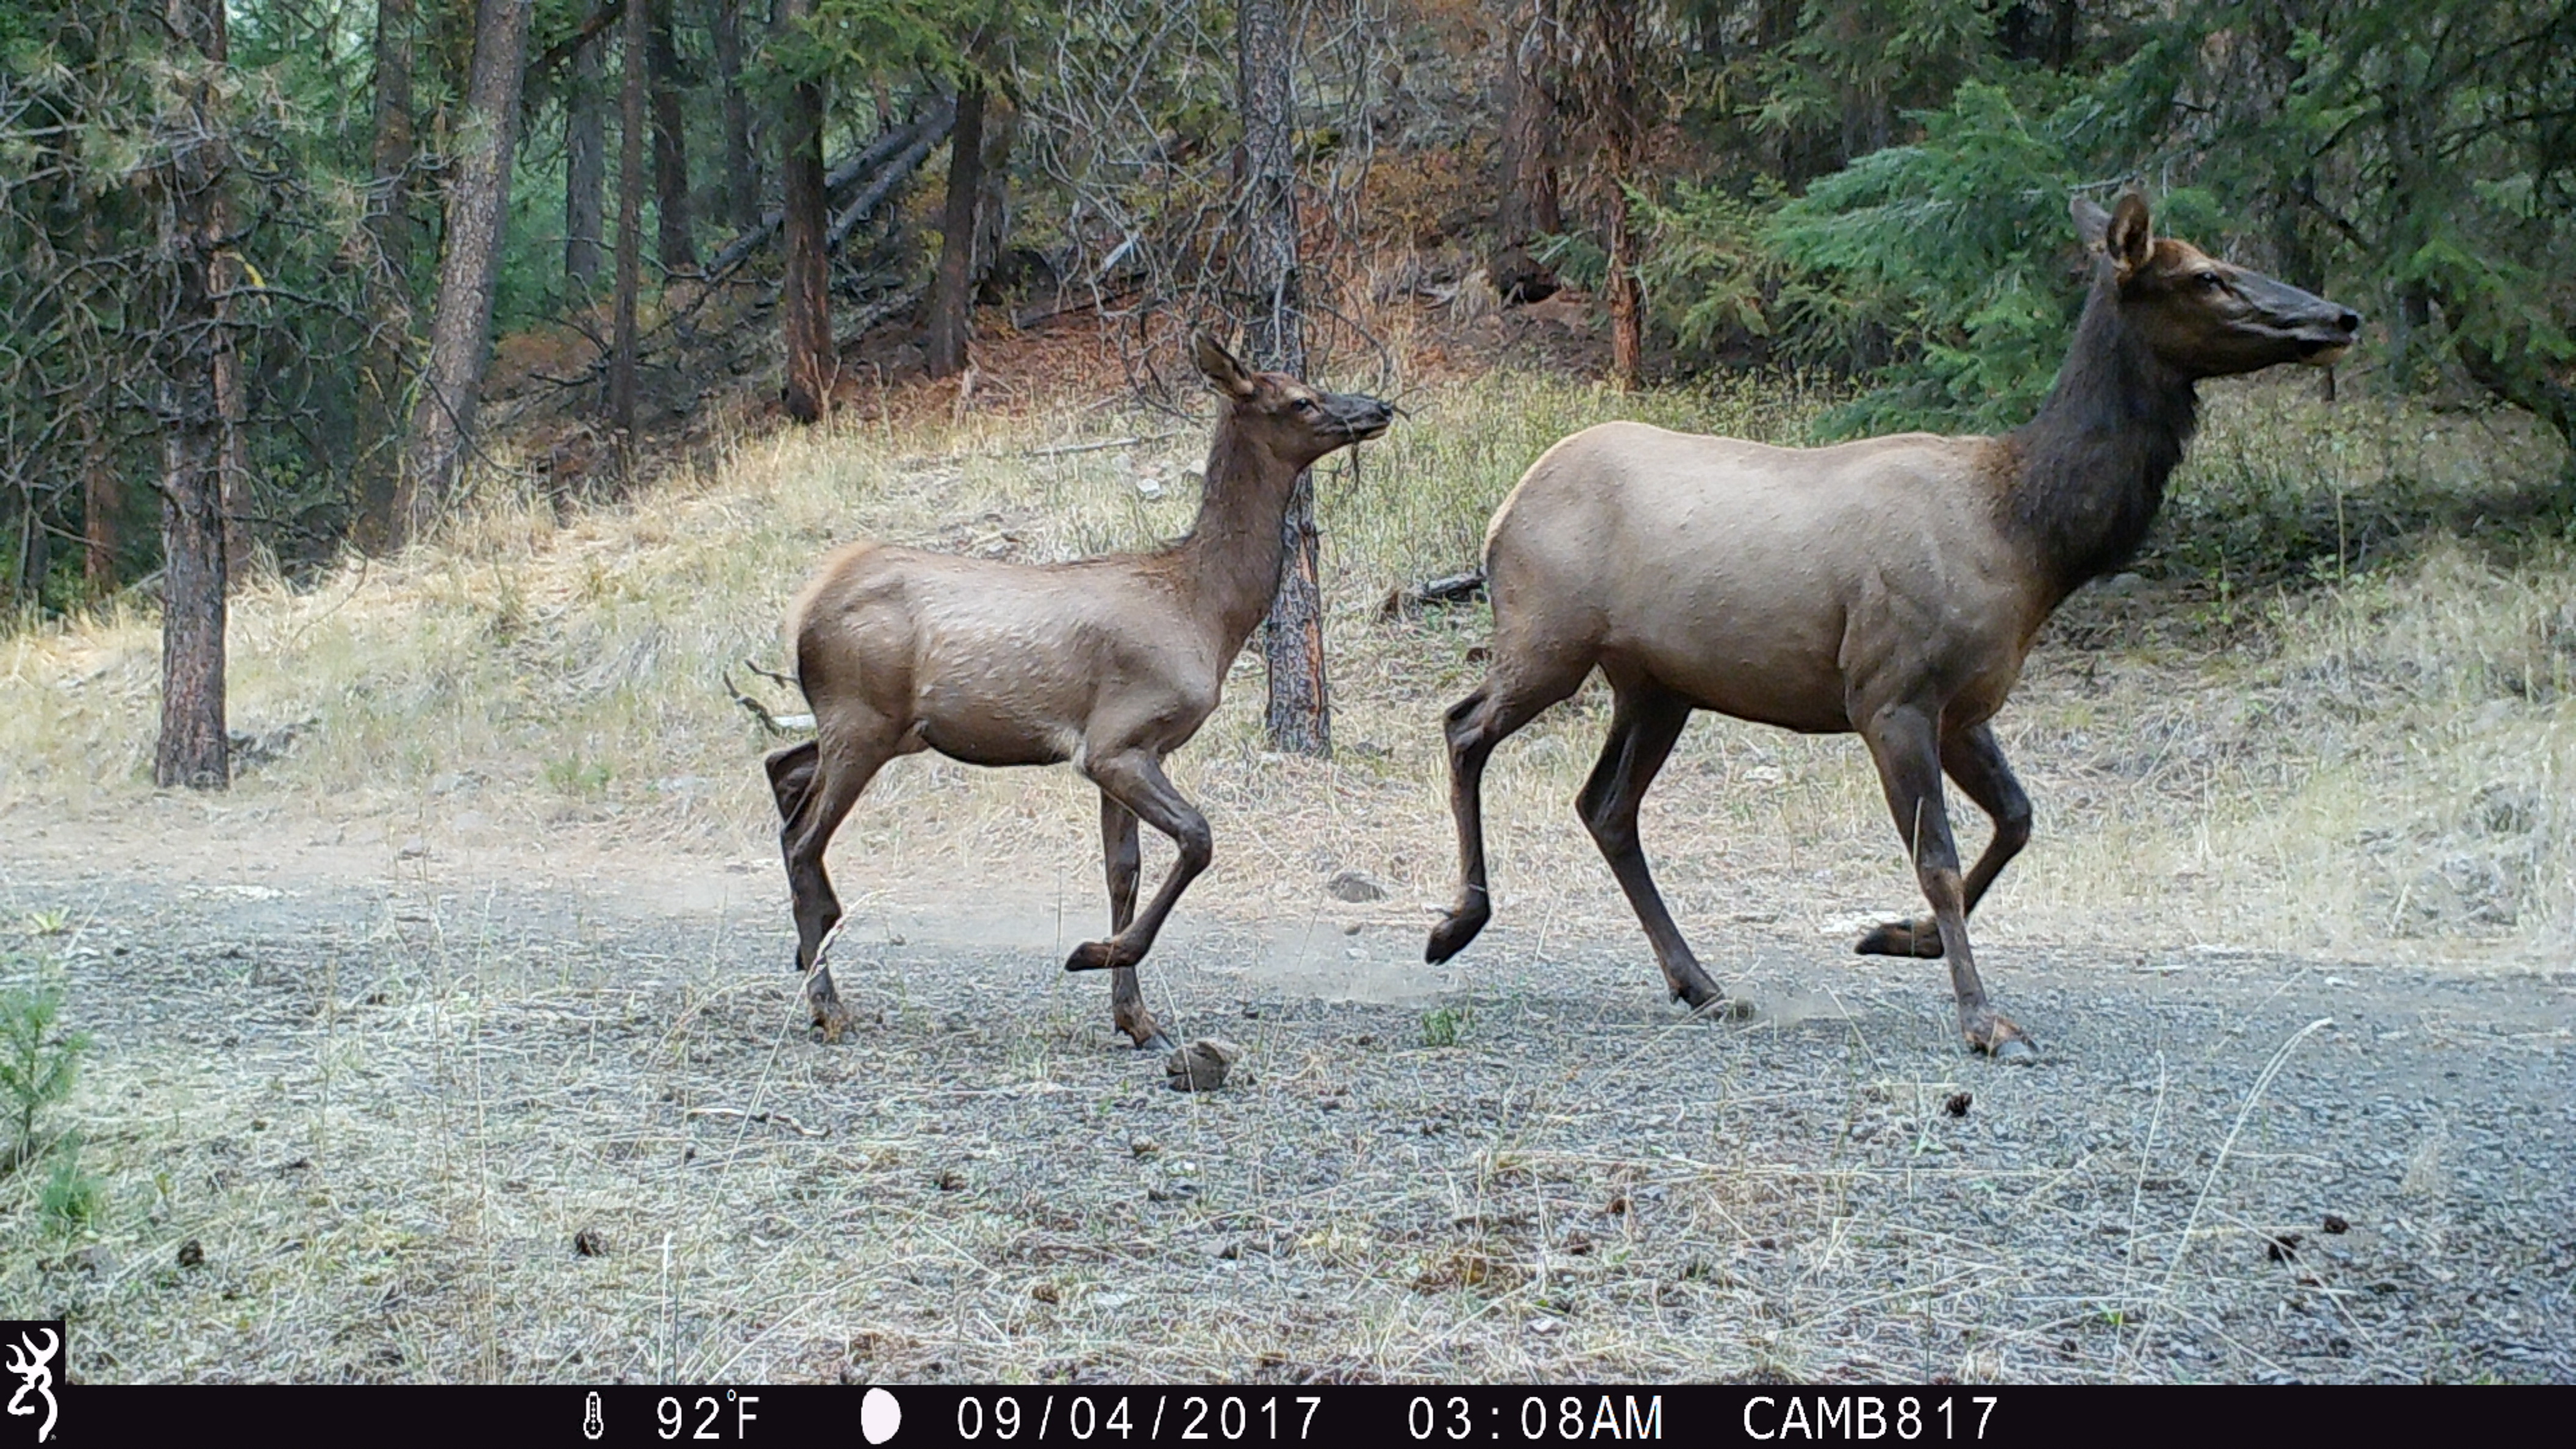 Elk calving suffers when disturbed by people, whether on bikes, hiking, or other modes.